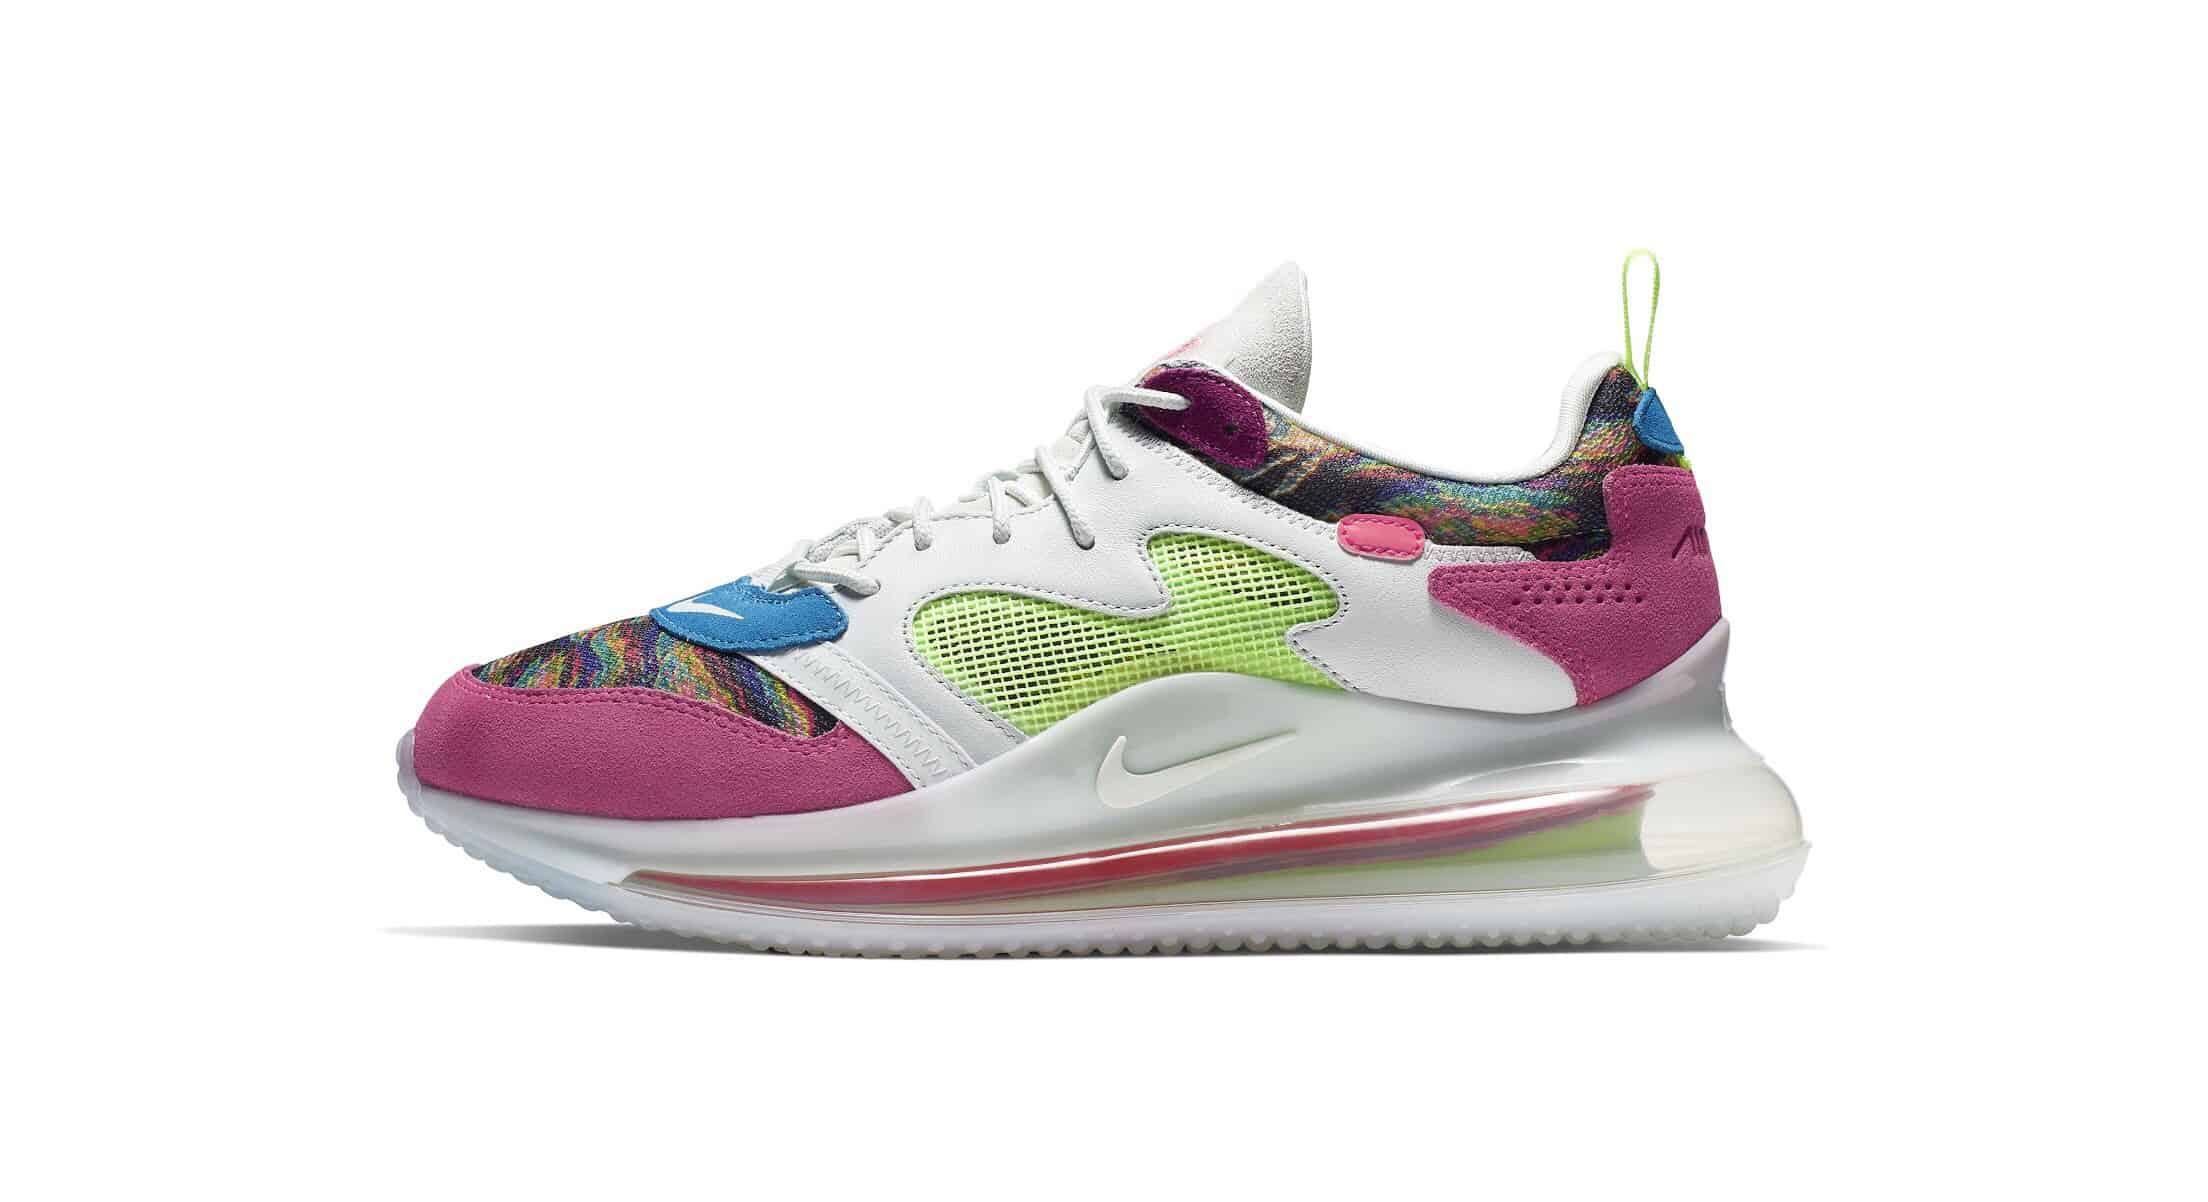 Nike Women's Air Max 720 Running Shoes, Pink/blue In Multi